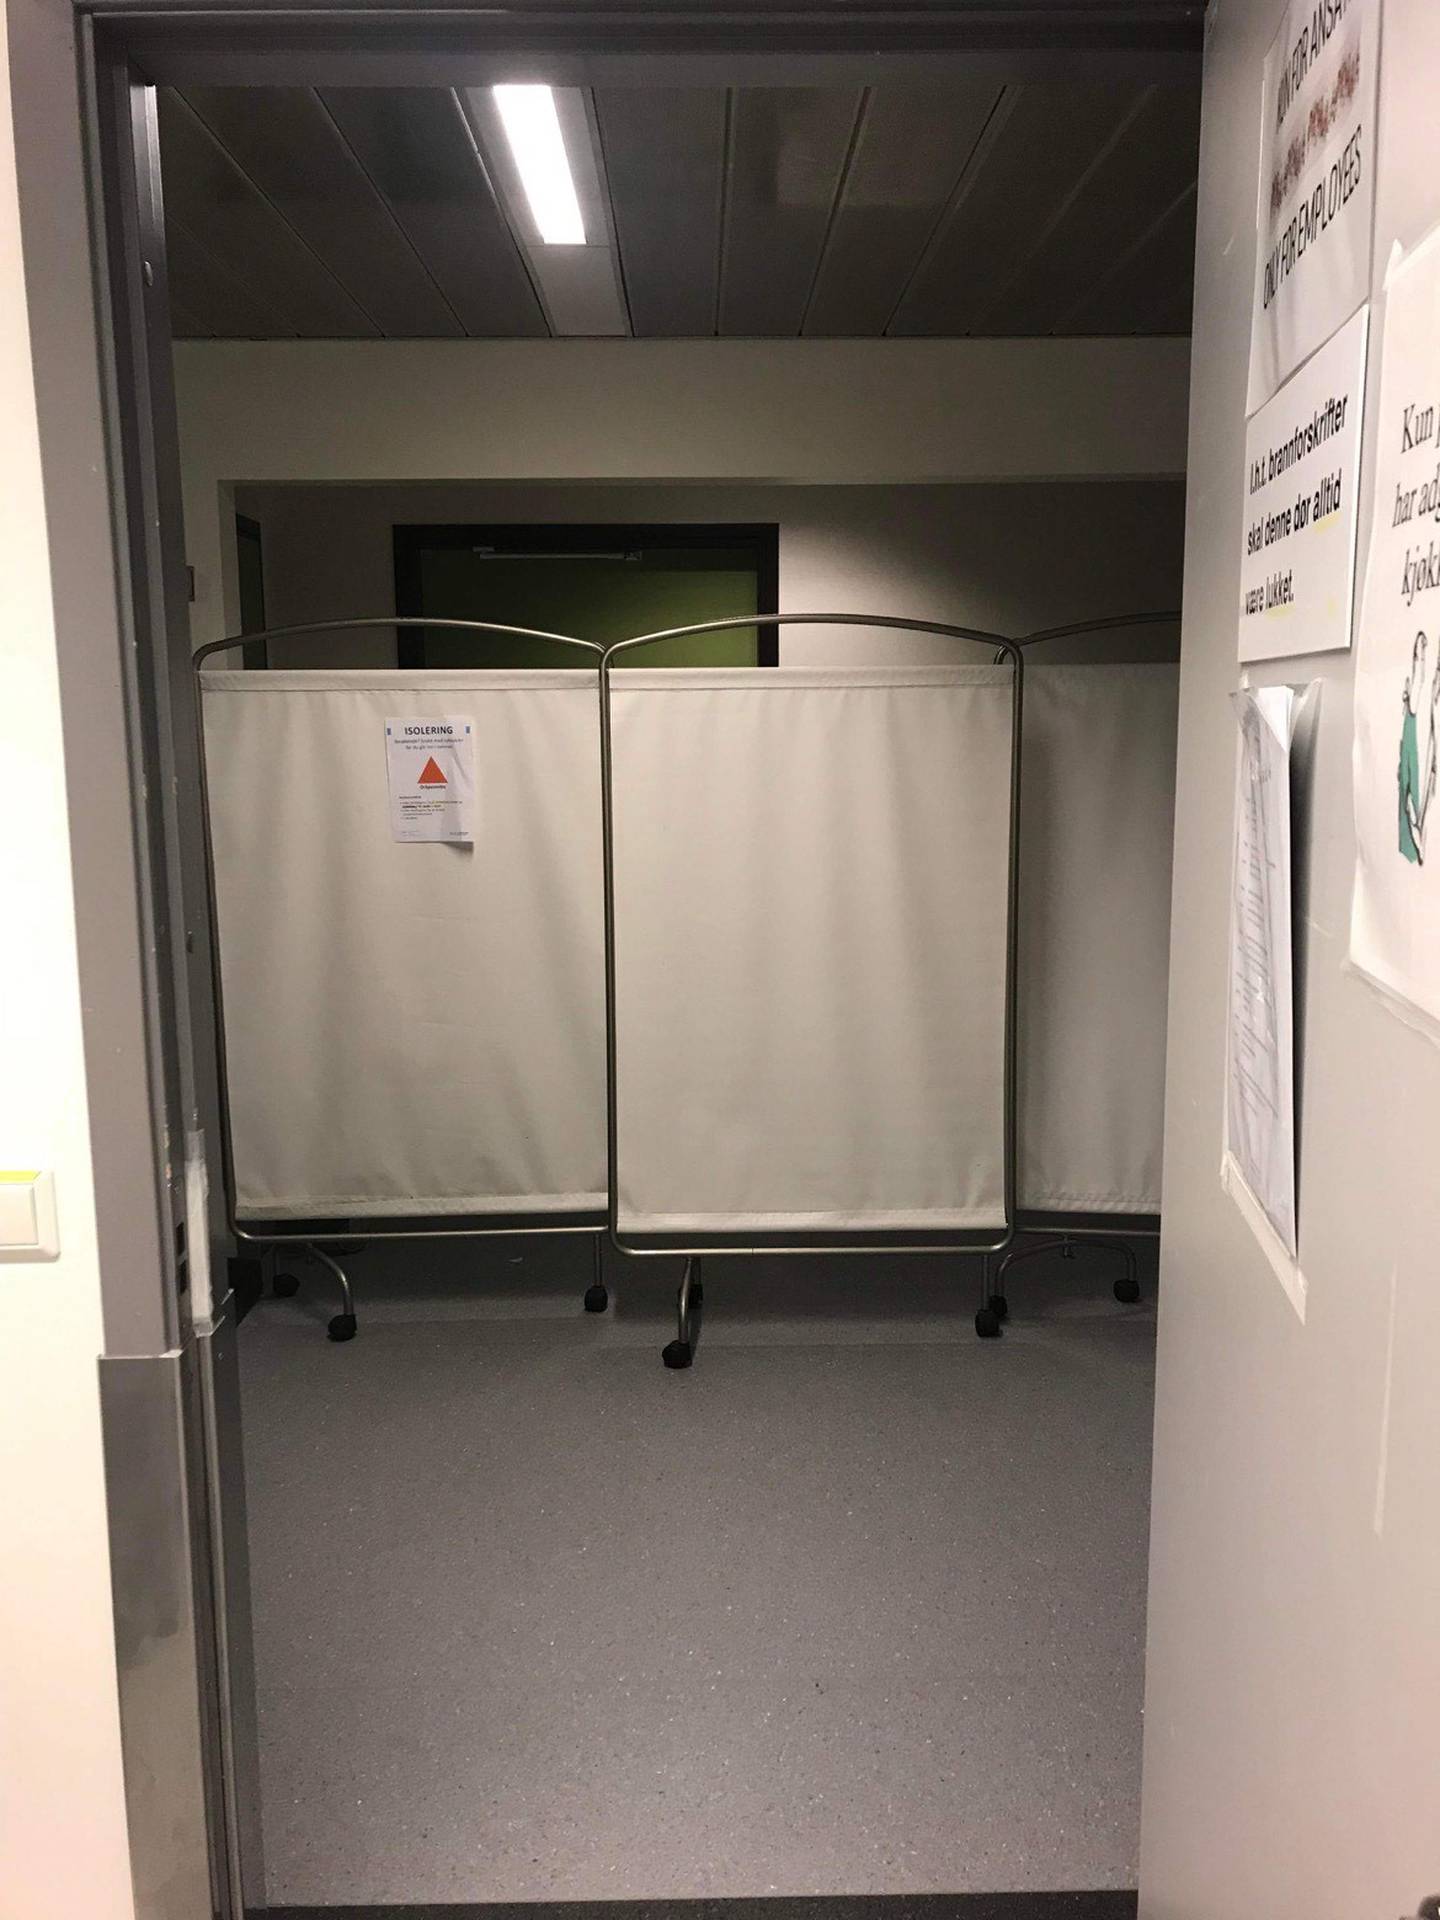 Due to the increase in coronavirus infections, corona patients are placed in a room in the pulmonary department of the SUS.  Nurses respond to infection control management.  Screens were placed in front of the room.  There is no infection lock.